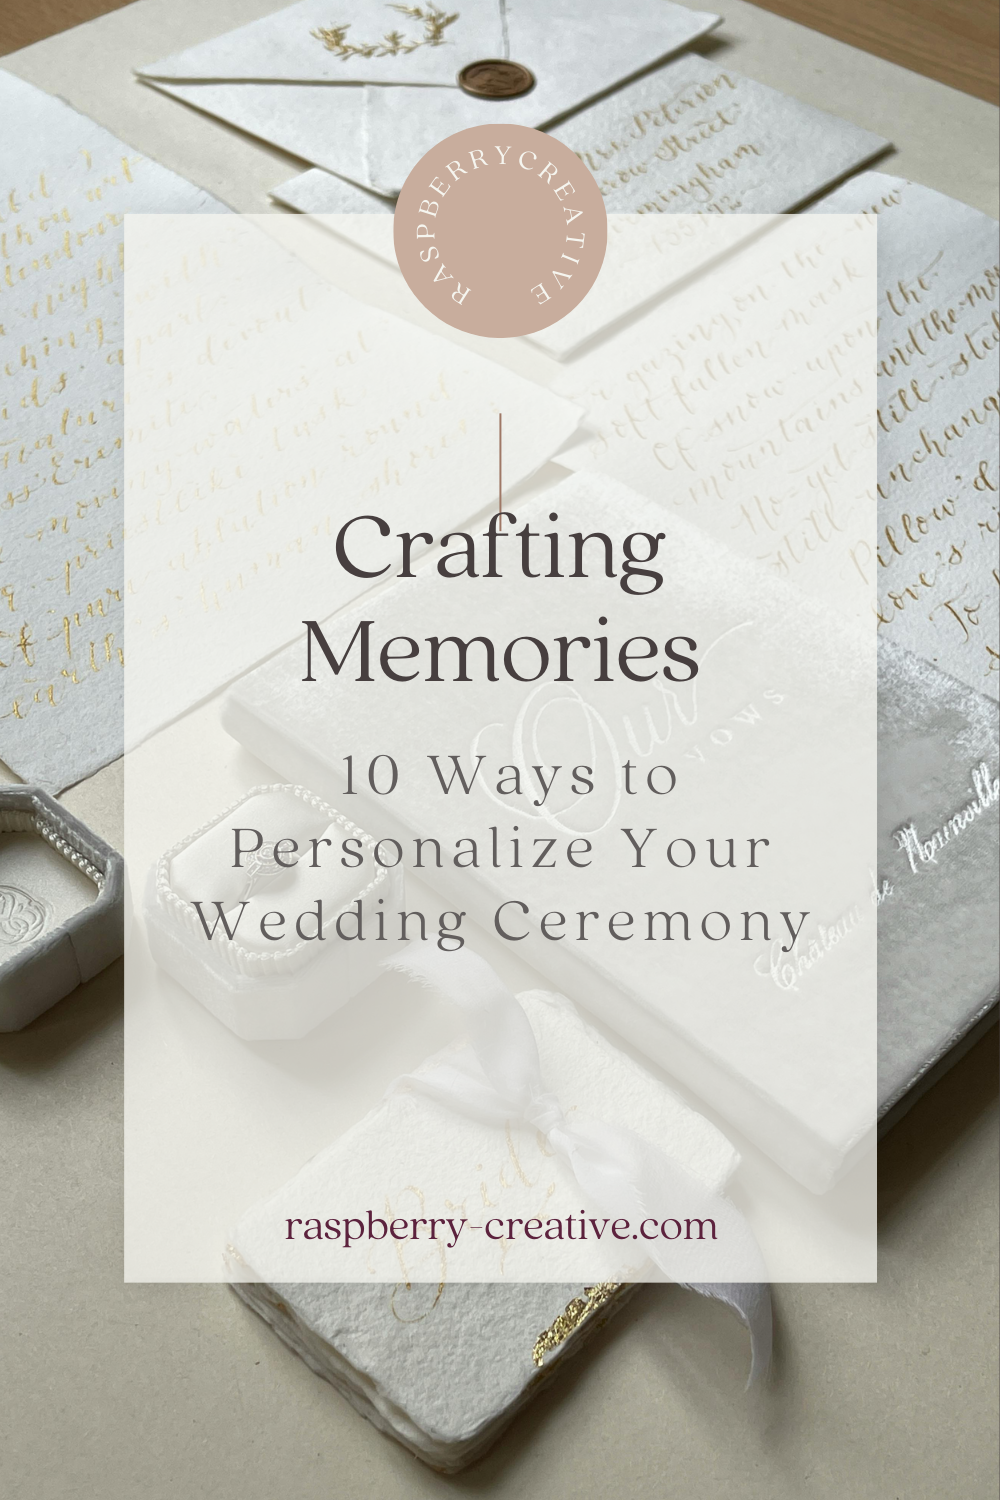 Crafting Memories: 10 Ways to Personalize Your Wedding Ceremony​